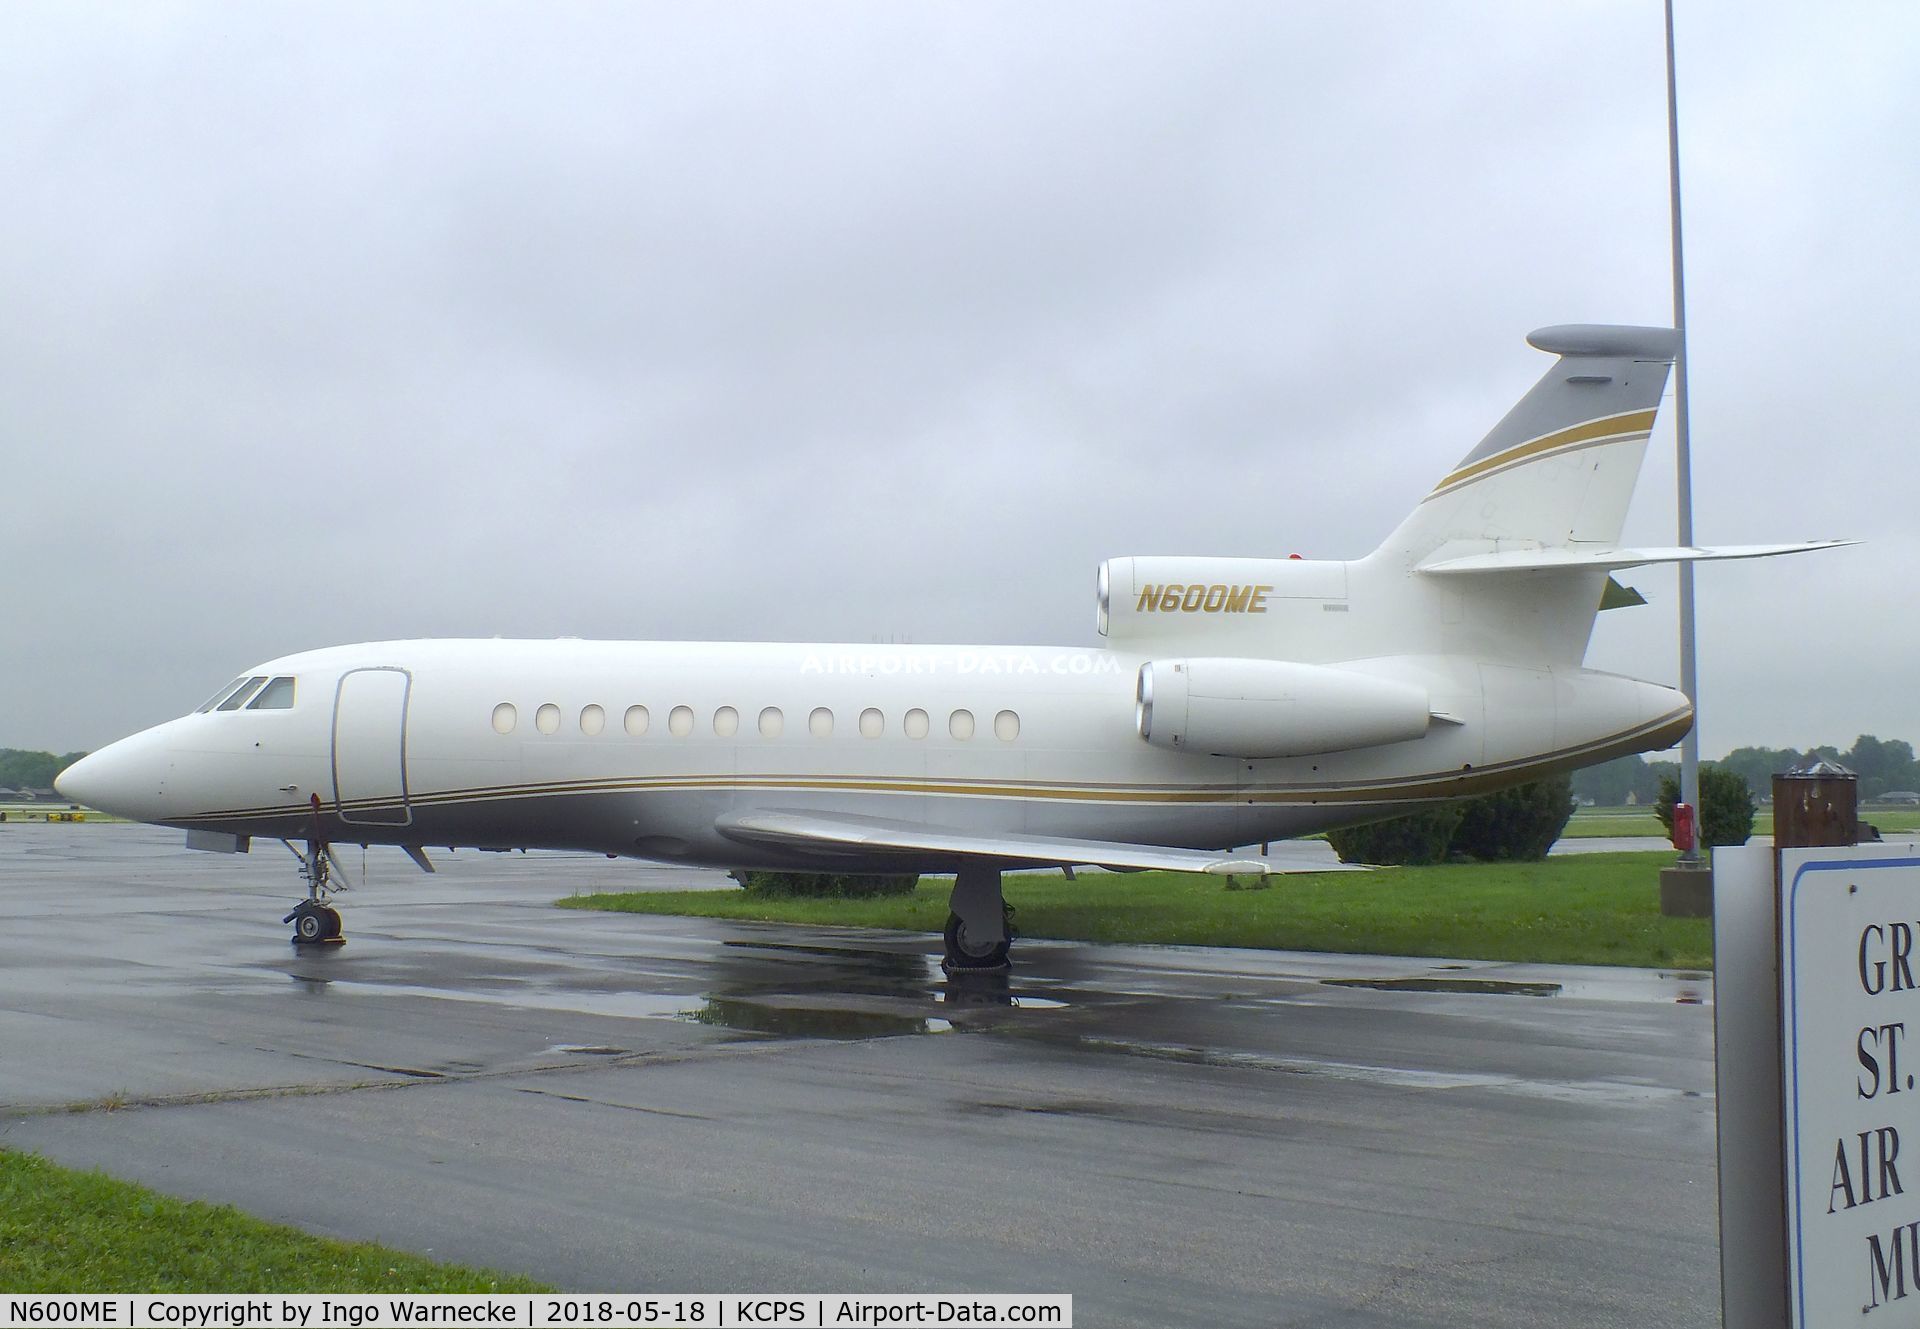 N600ME, 1997 Dassault Falcon 900 C/N 163, Dassault Falcon 900 at the St. Louis Downtown Airport, Cahokia IL